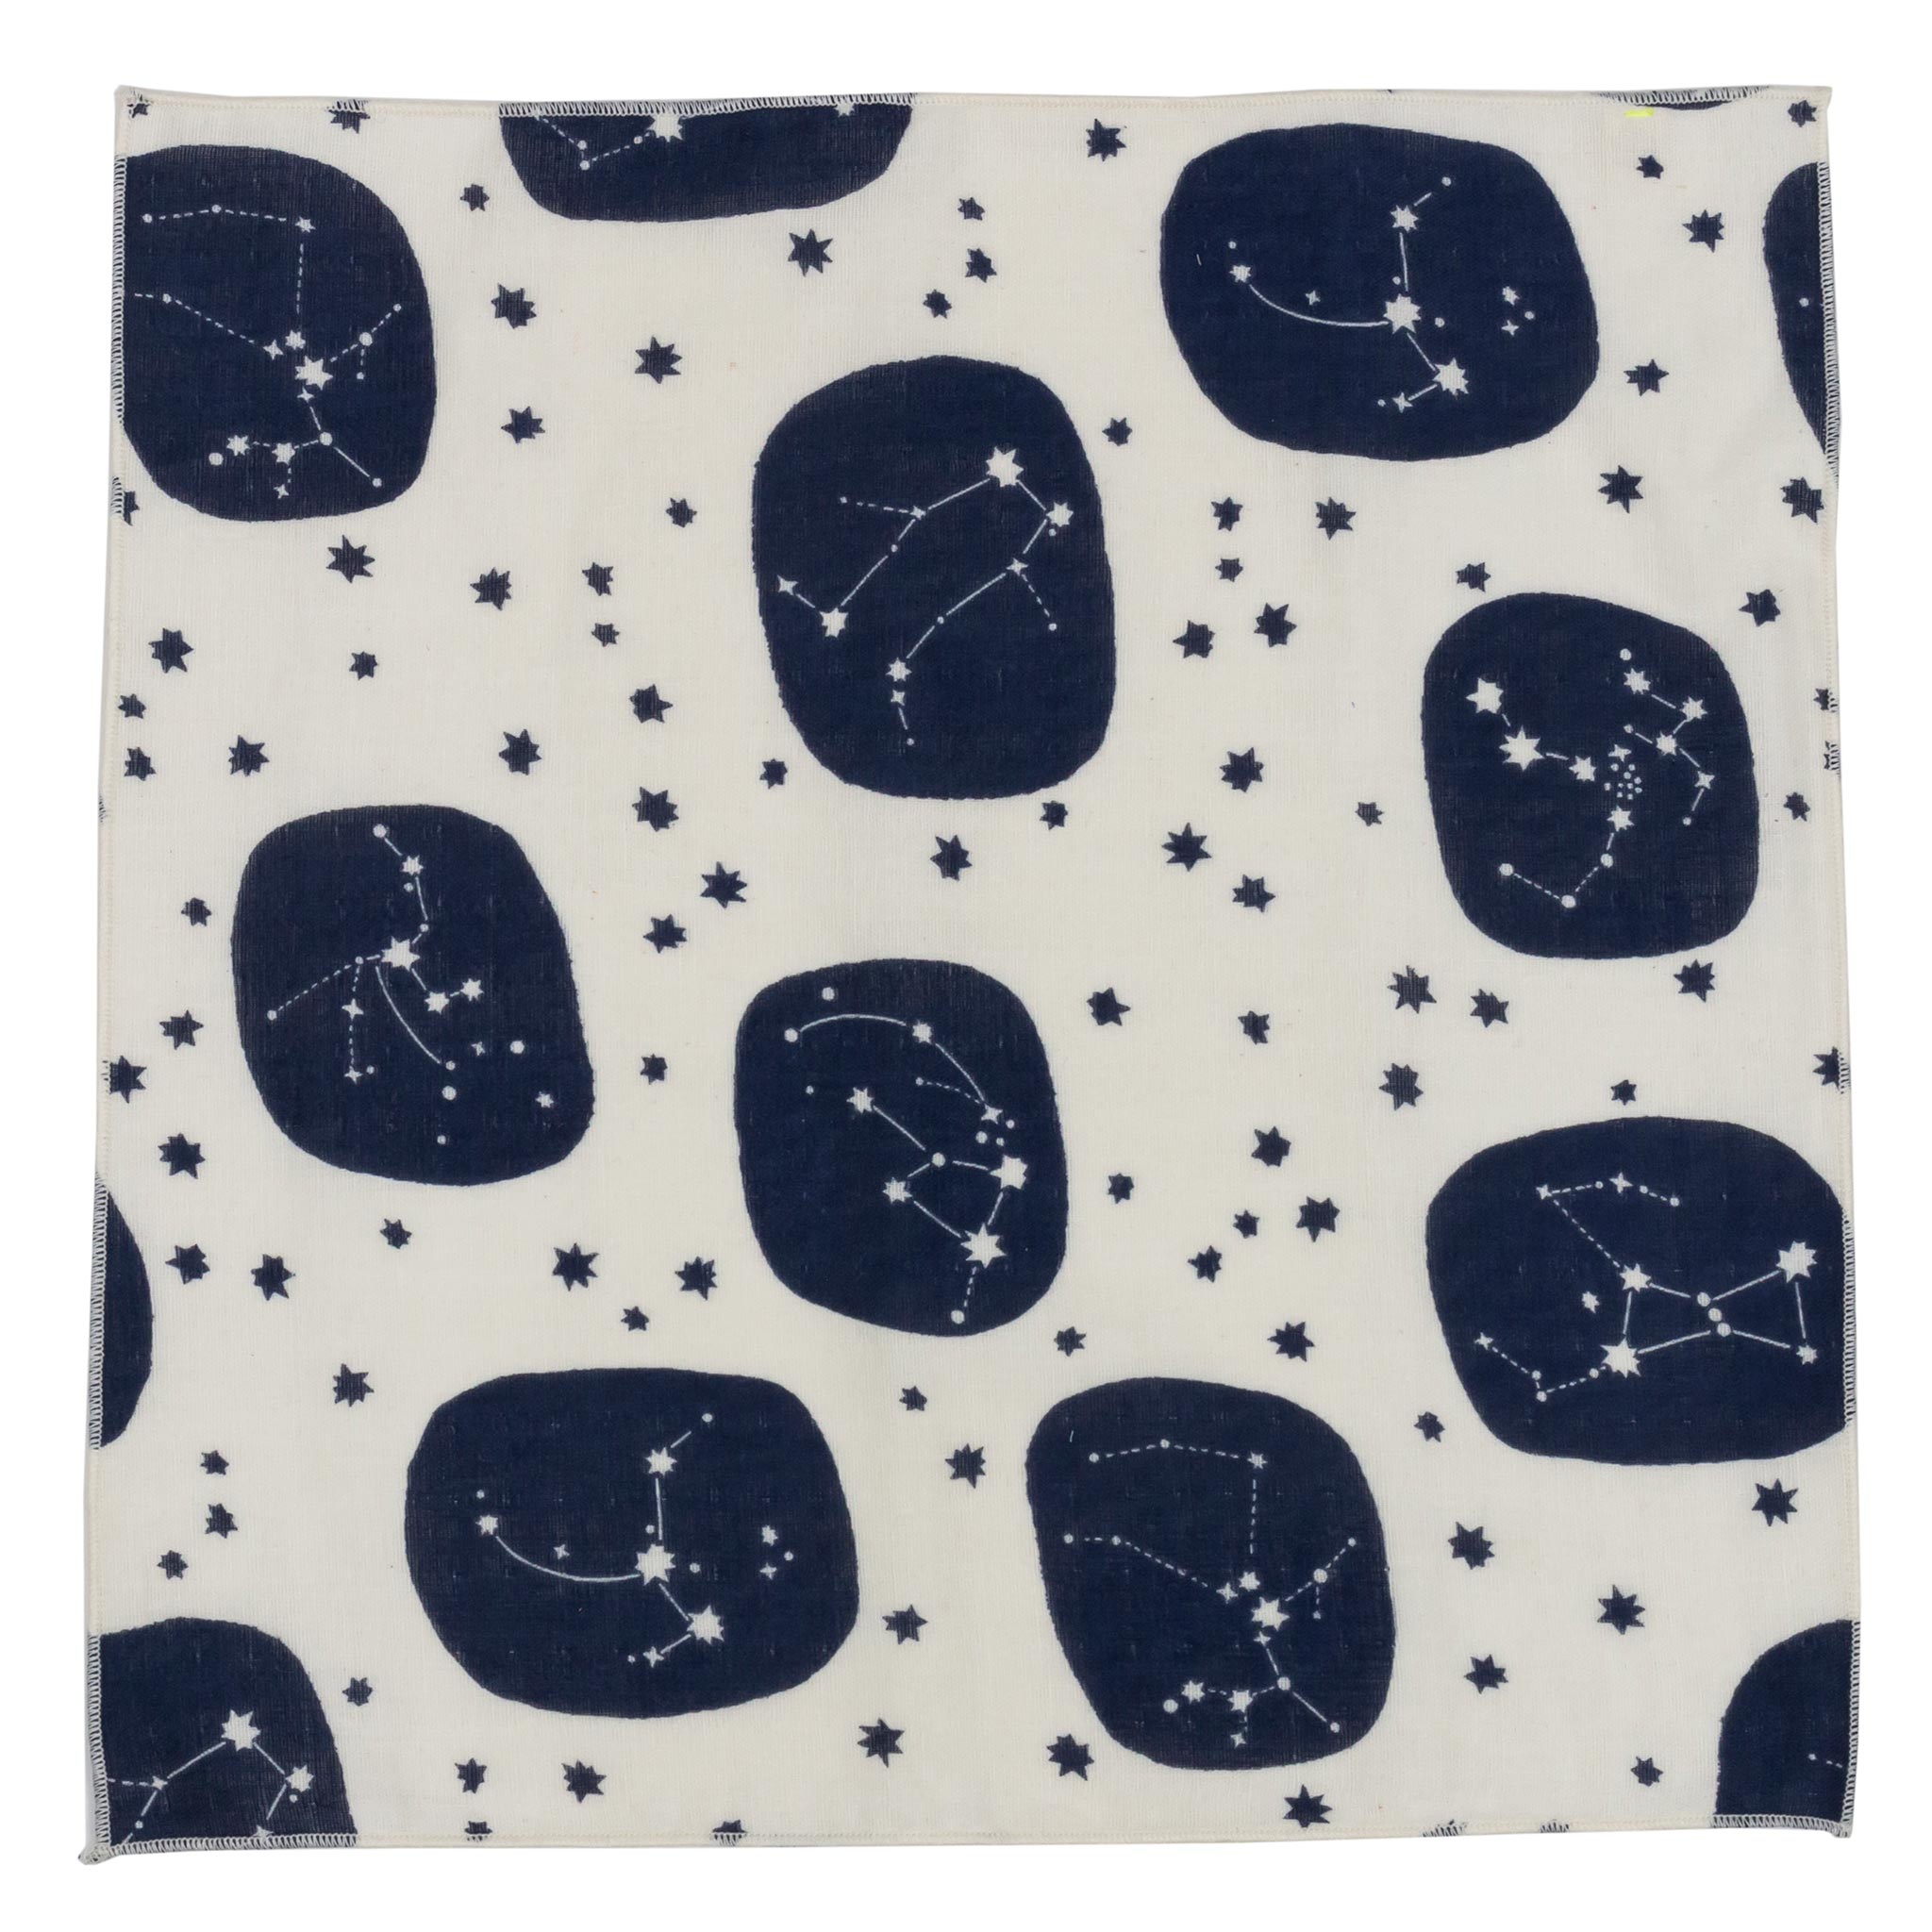 Astro stars Japanese cotton pocket square made in Canada